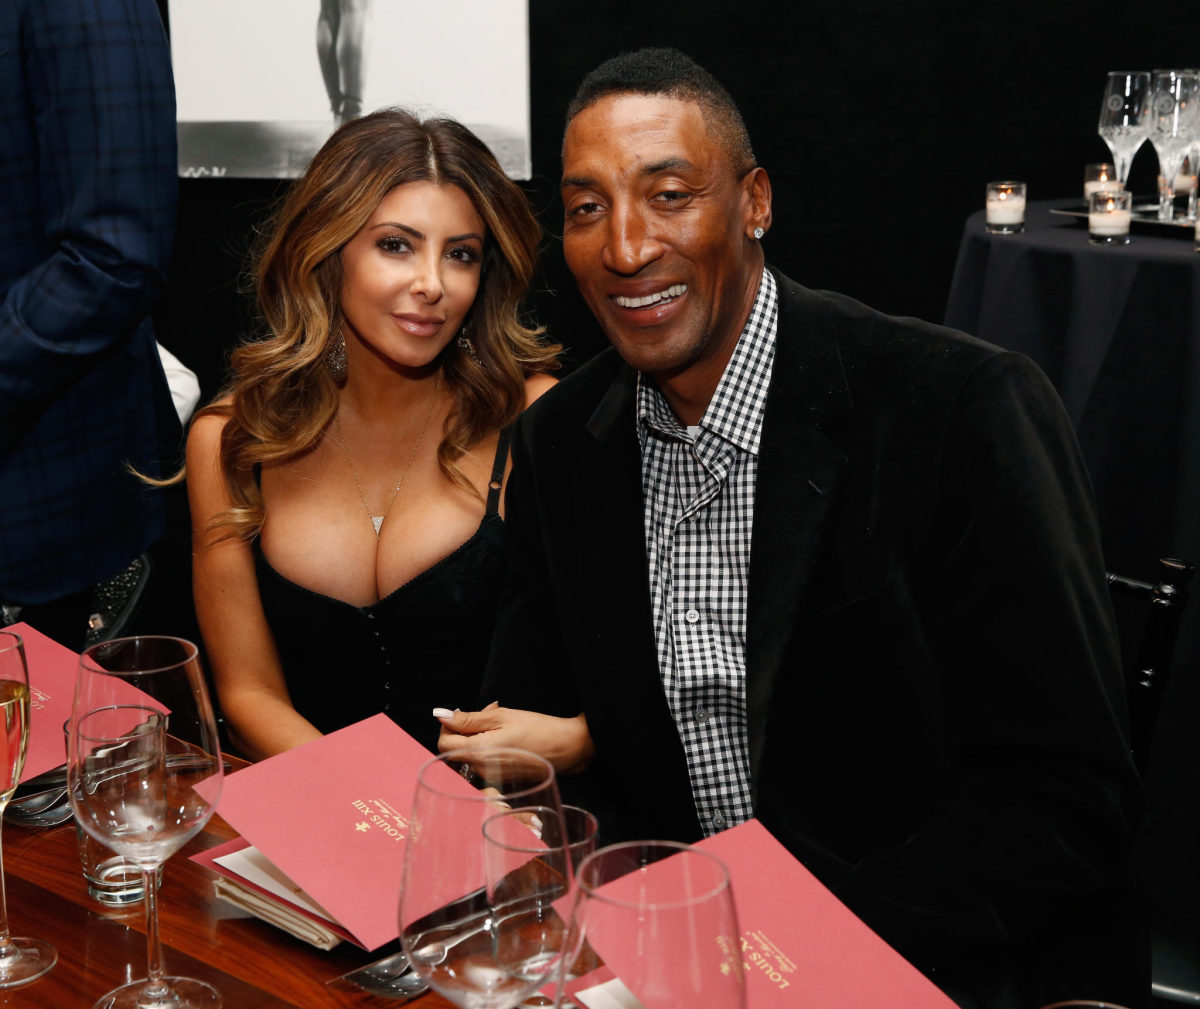 Who Is Scottie Pippen's Wife? Know About His Relationships